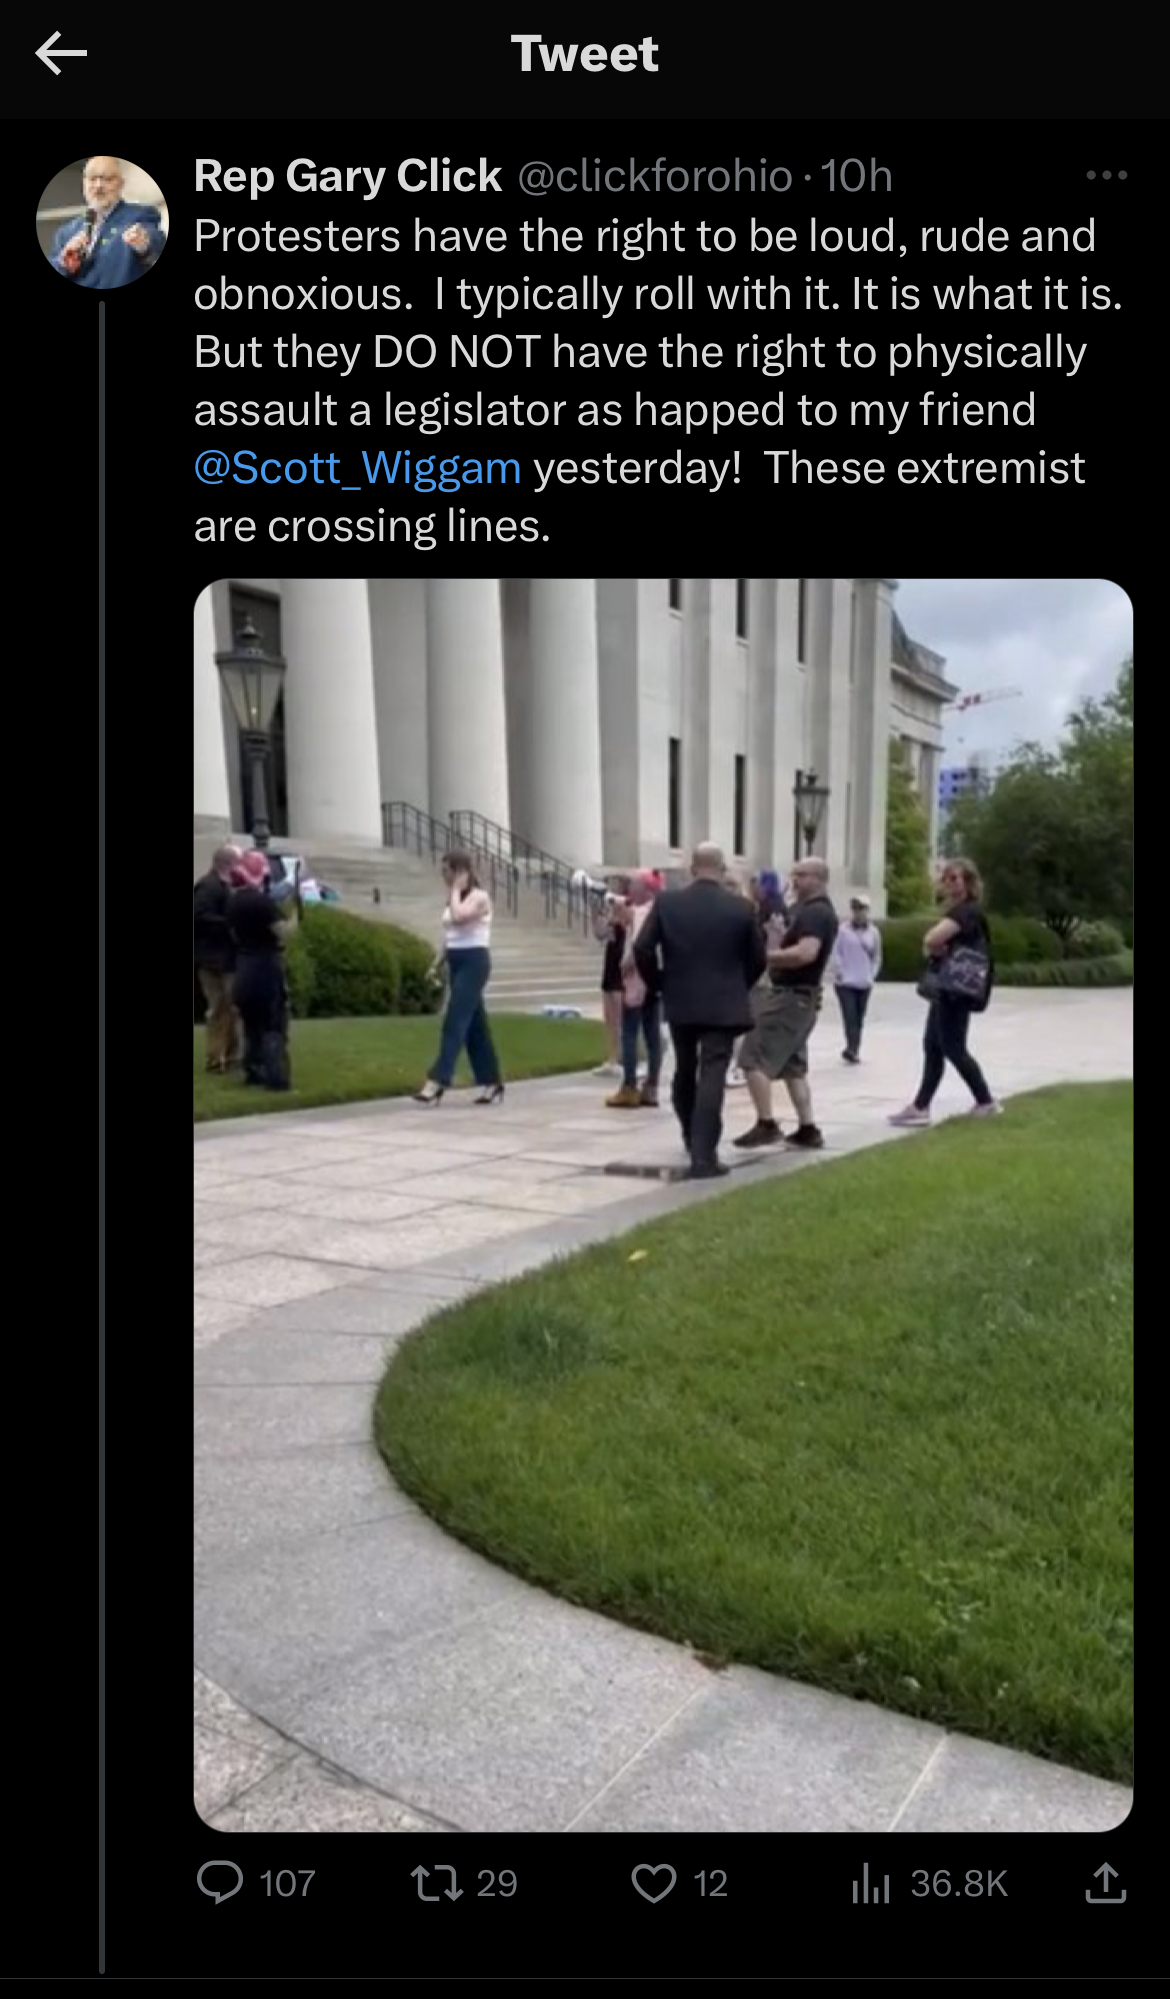 Twitter handle at click for ohio posting publicly and lying publicly, claiming trans rights activists are harming people when State Rep Stott Wiggam pushes a protestor intentionally by the looks of the video.